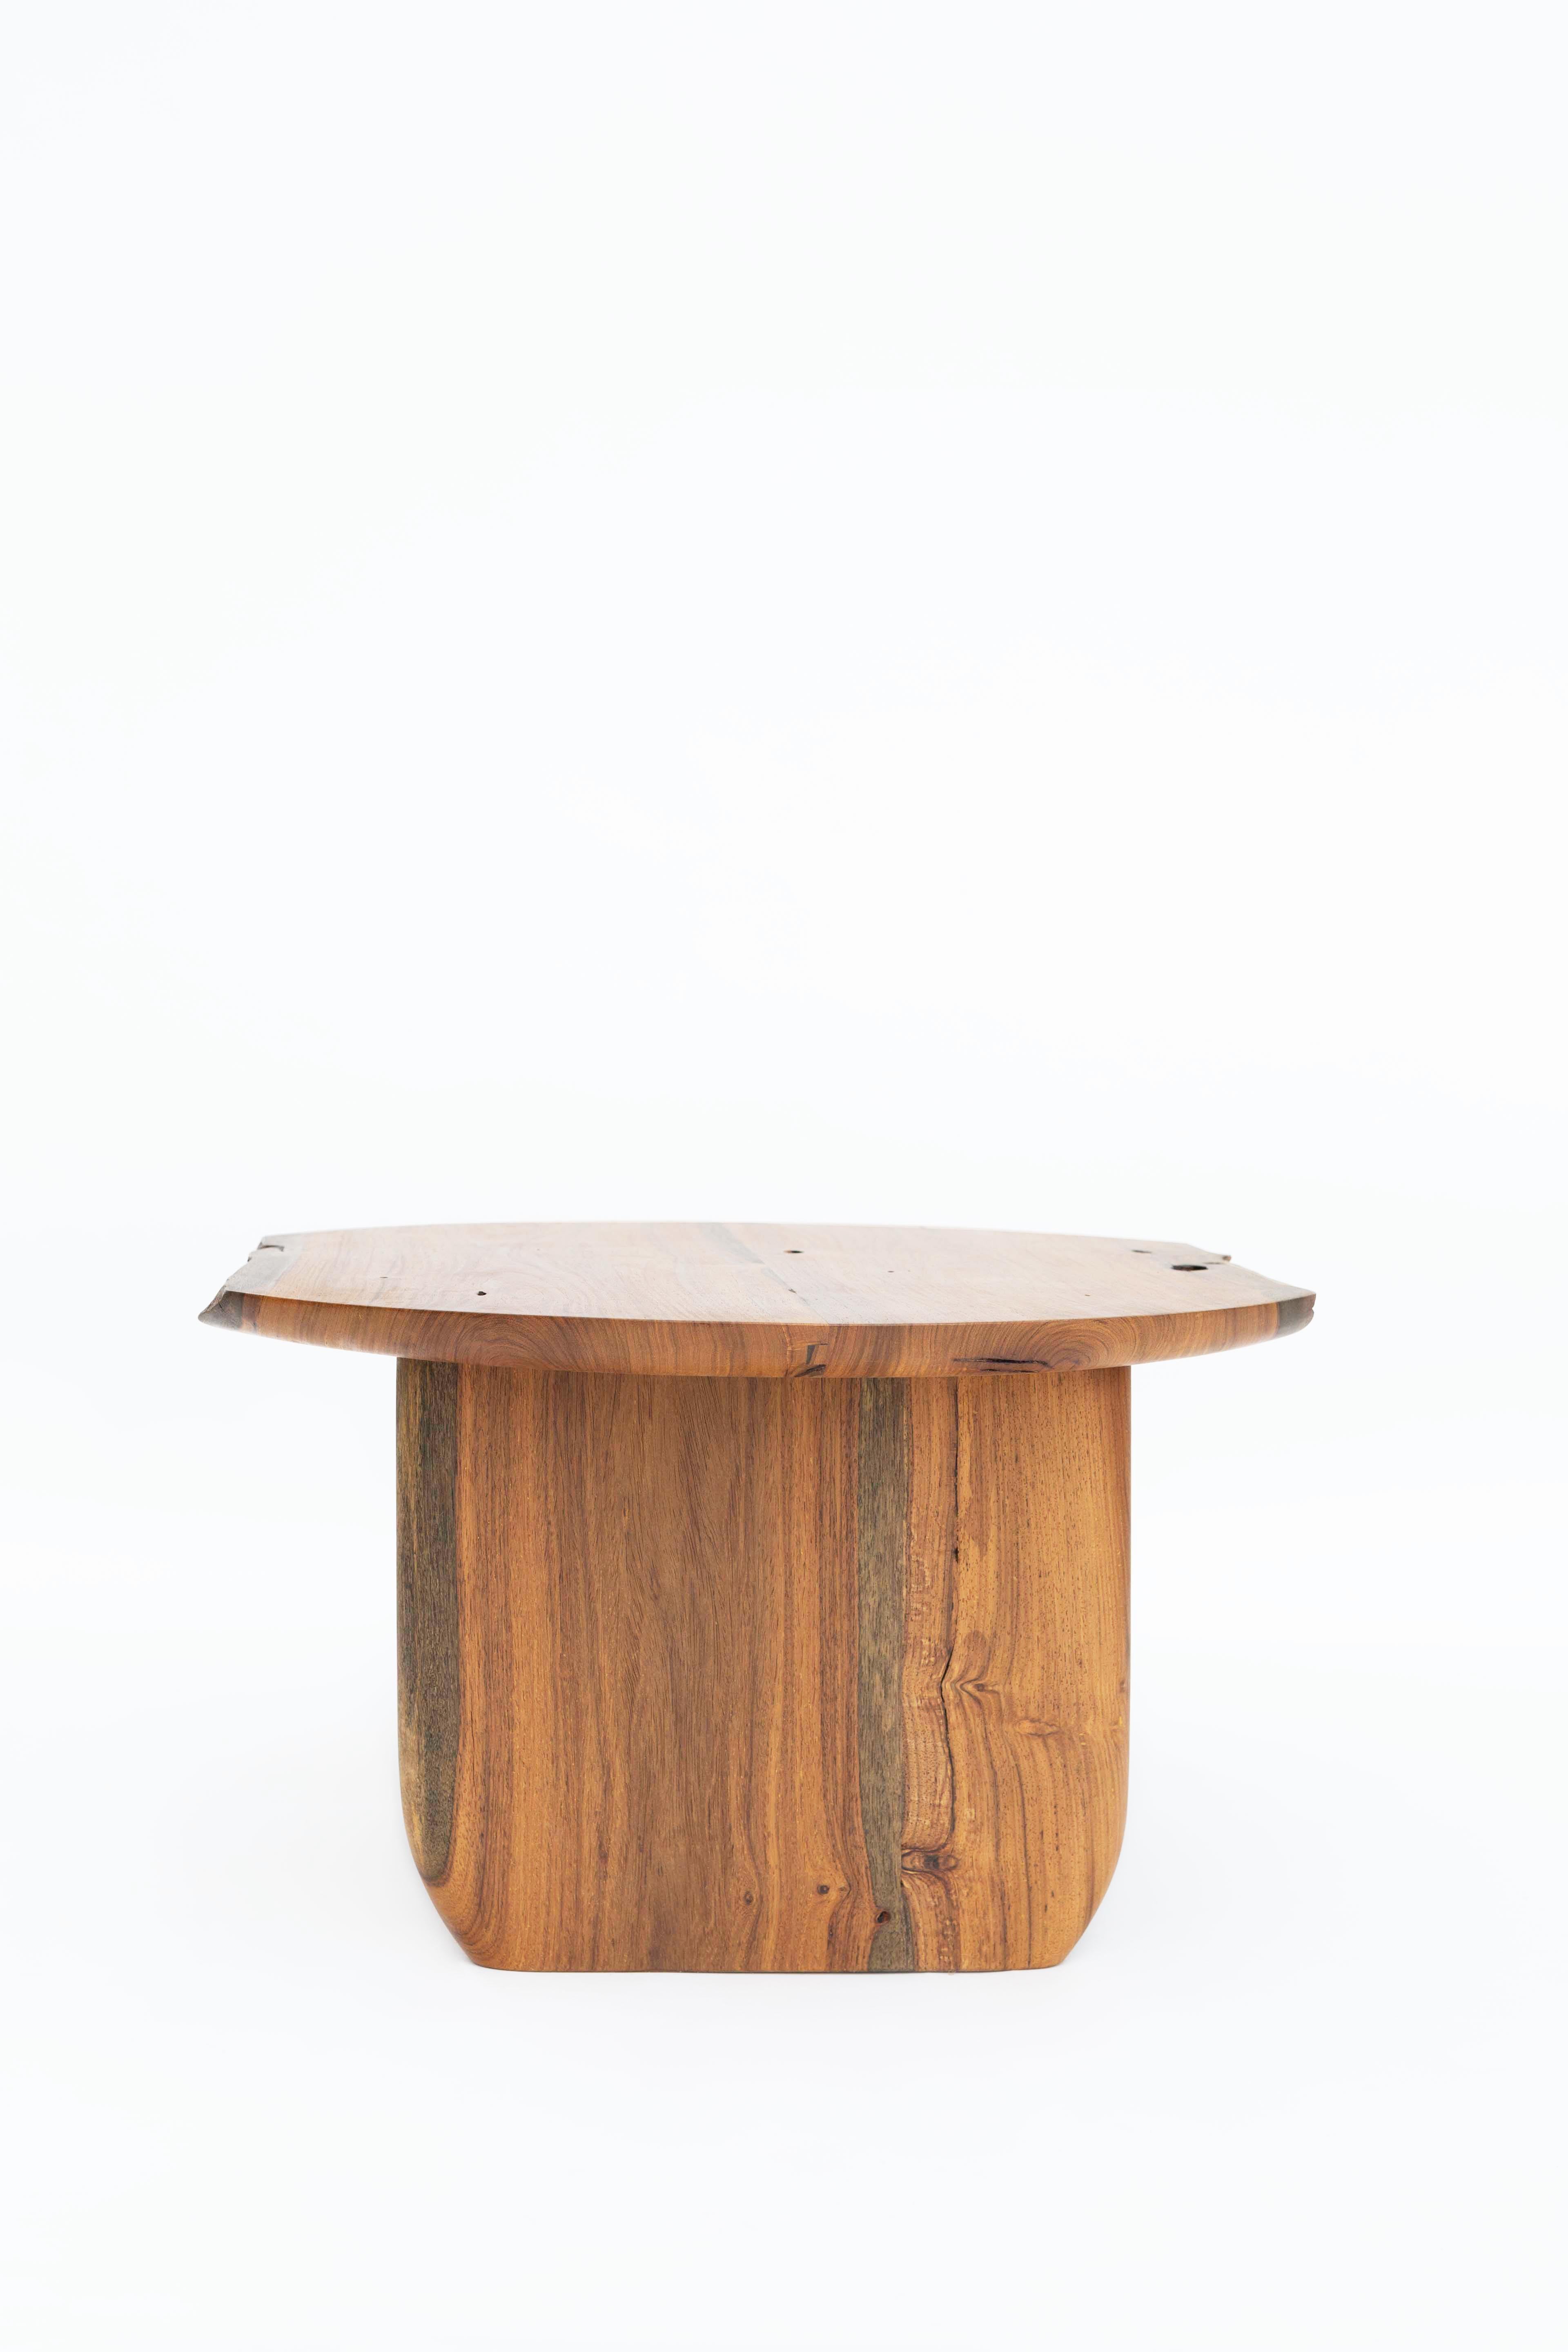 This Coffee Table is elaborated by using remarkable wood planks from the Jabin - Jamaican Dogwood tree, one of South Mexico’s hardwoods. It is characterized by its beautiful natural drawings with color tones ranging from brown, gold to yellow.
The